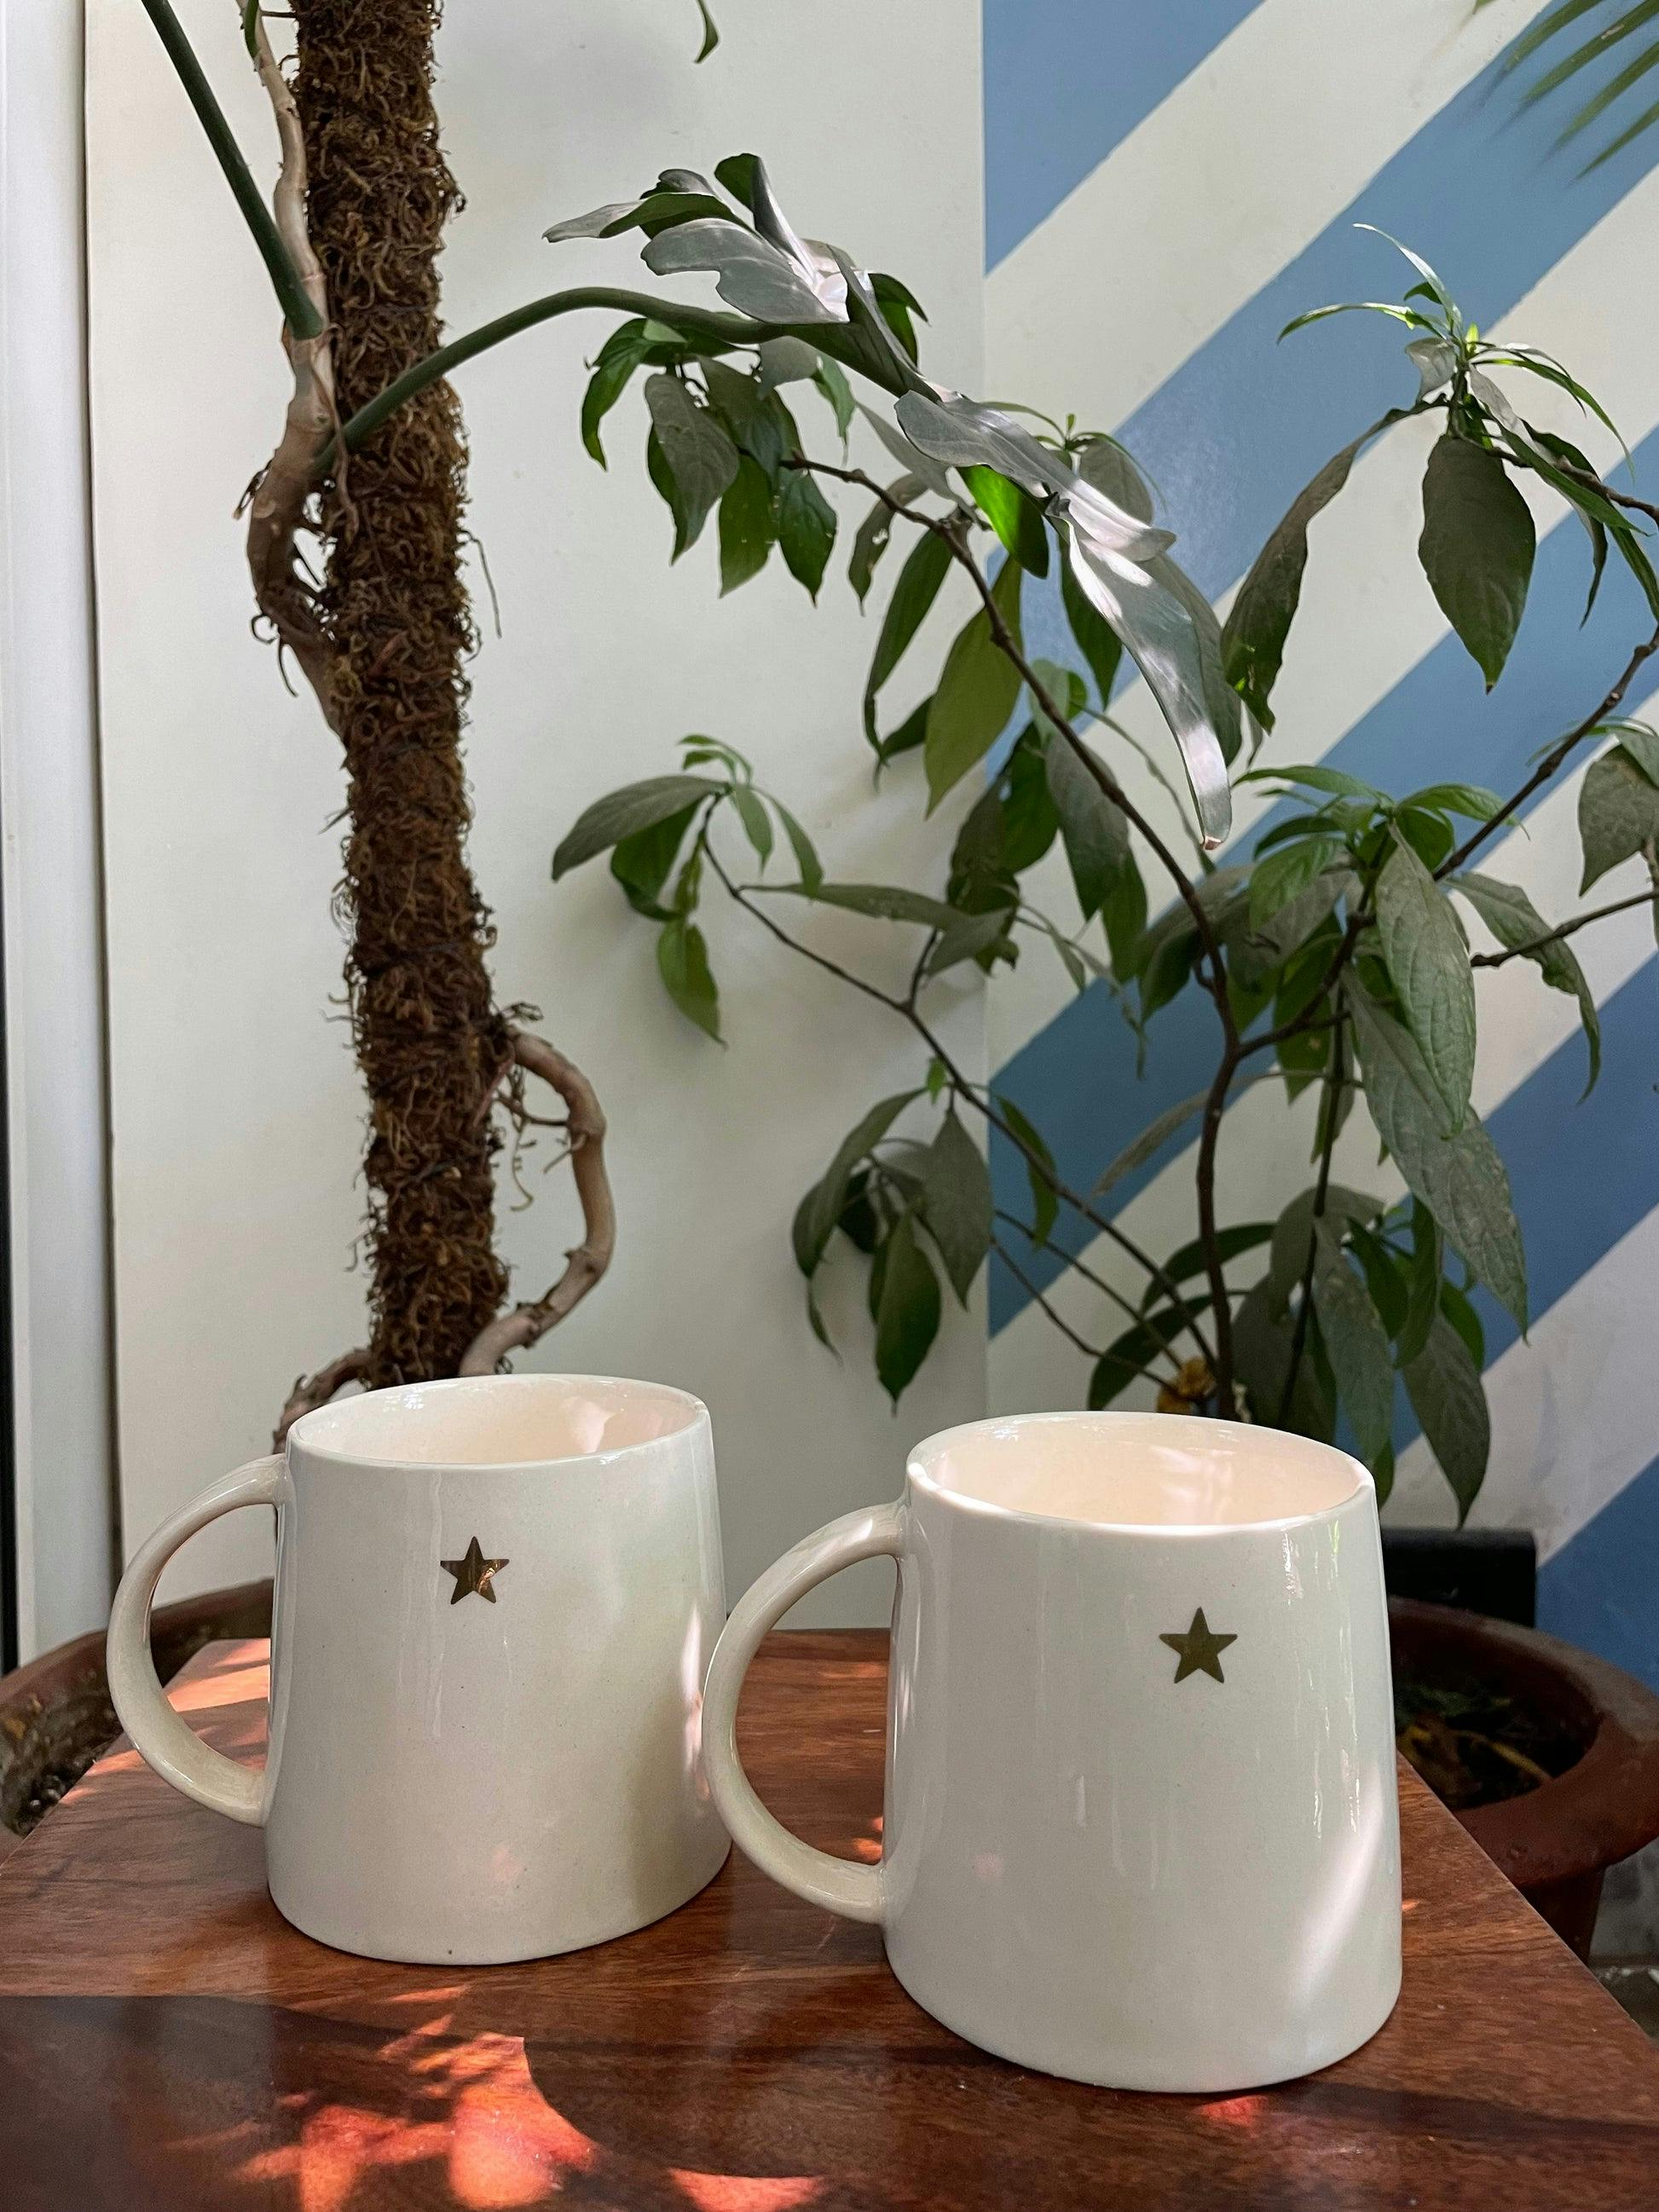 Star Gilt Mug - Set of 2, a product by Oh Yay project